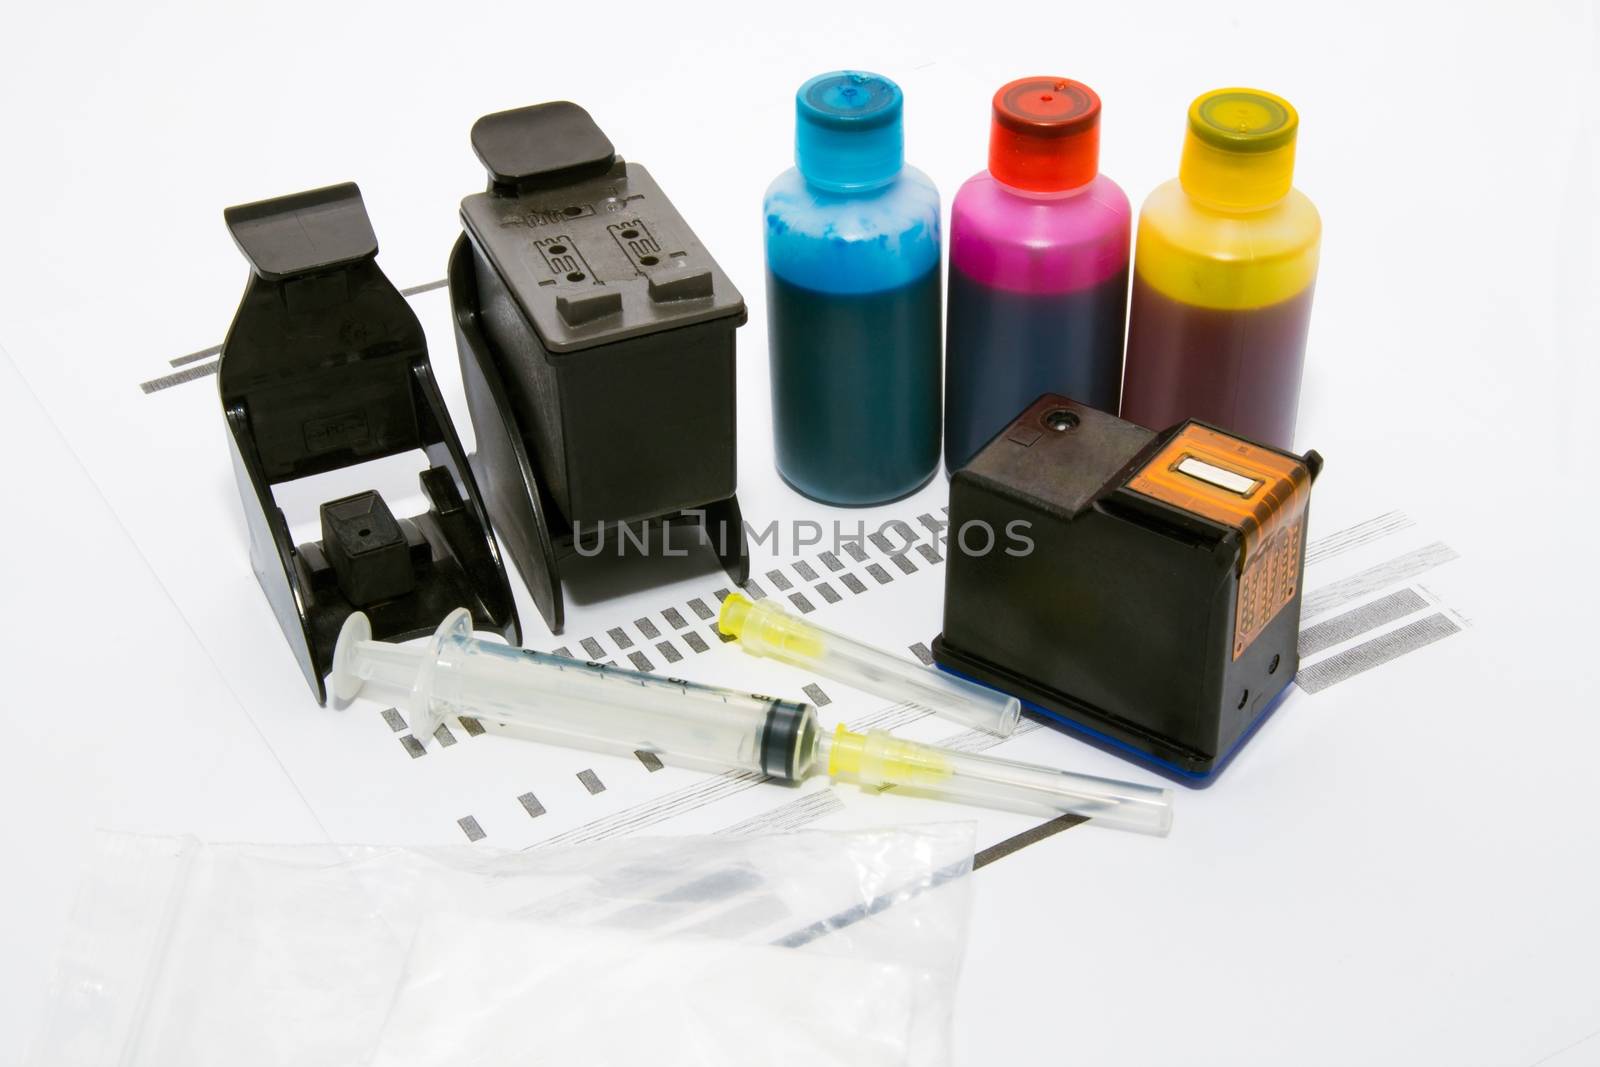 Ink refill set for printer by simpson33